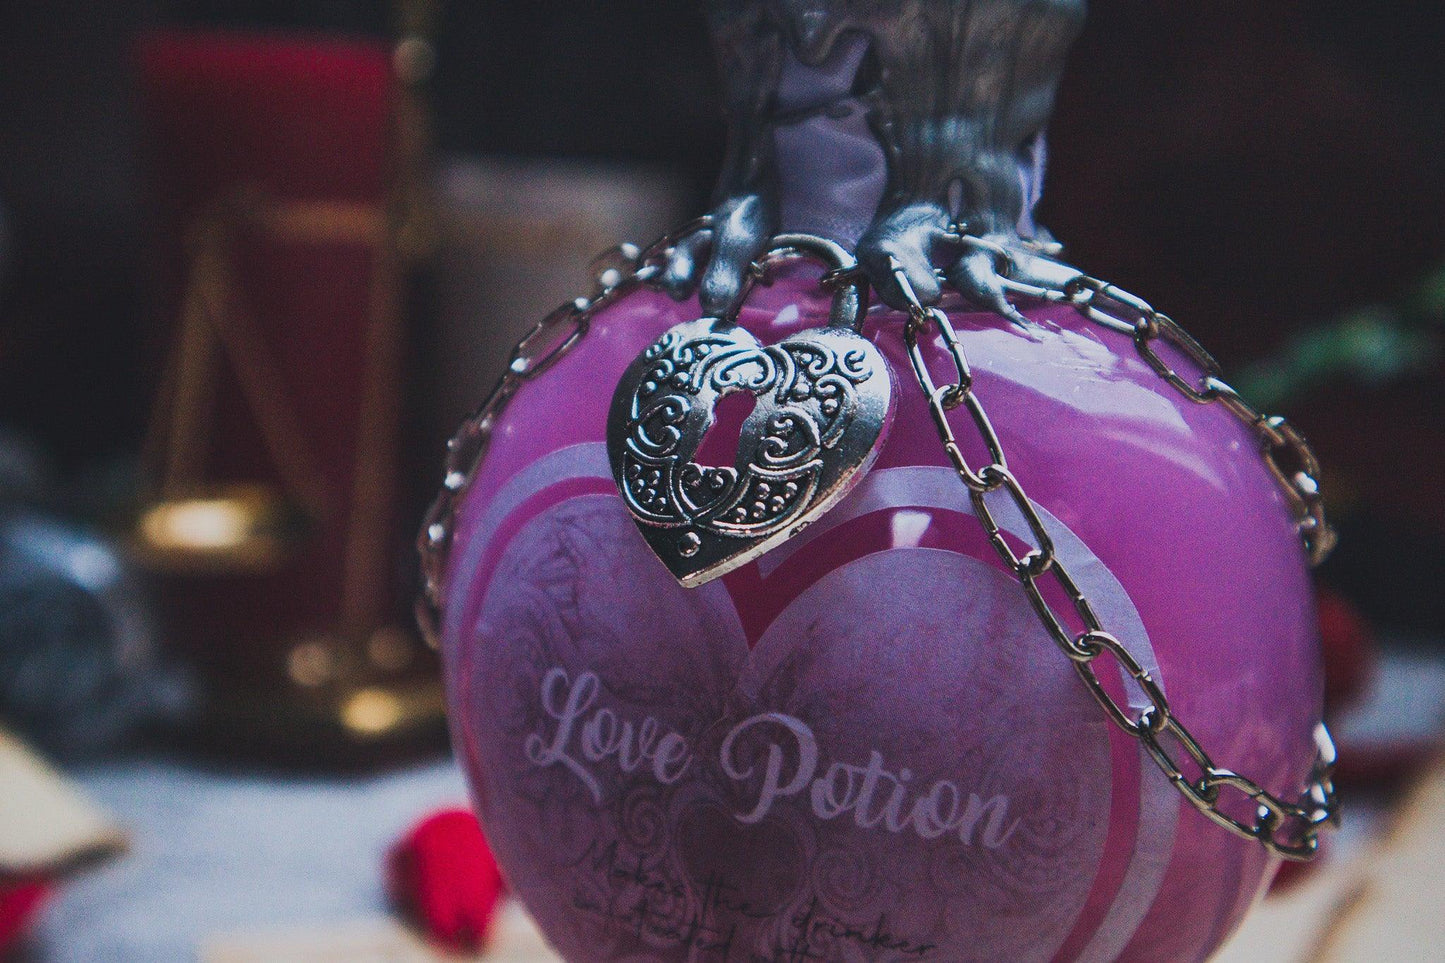 Love Potion Colour-changing potion - The Flaming Feather & Flaming Filament